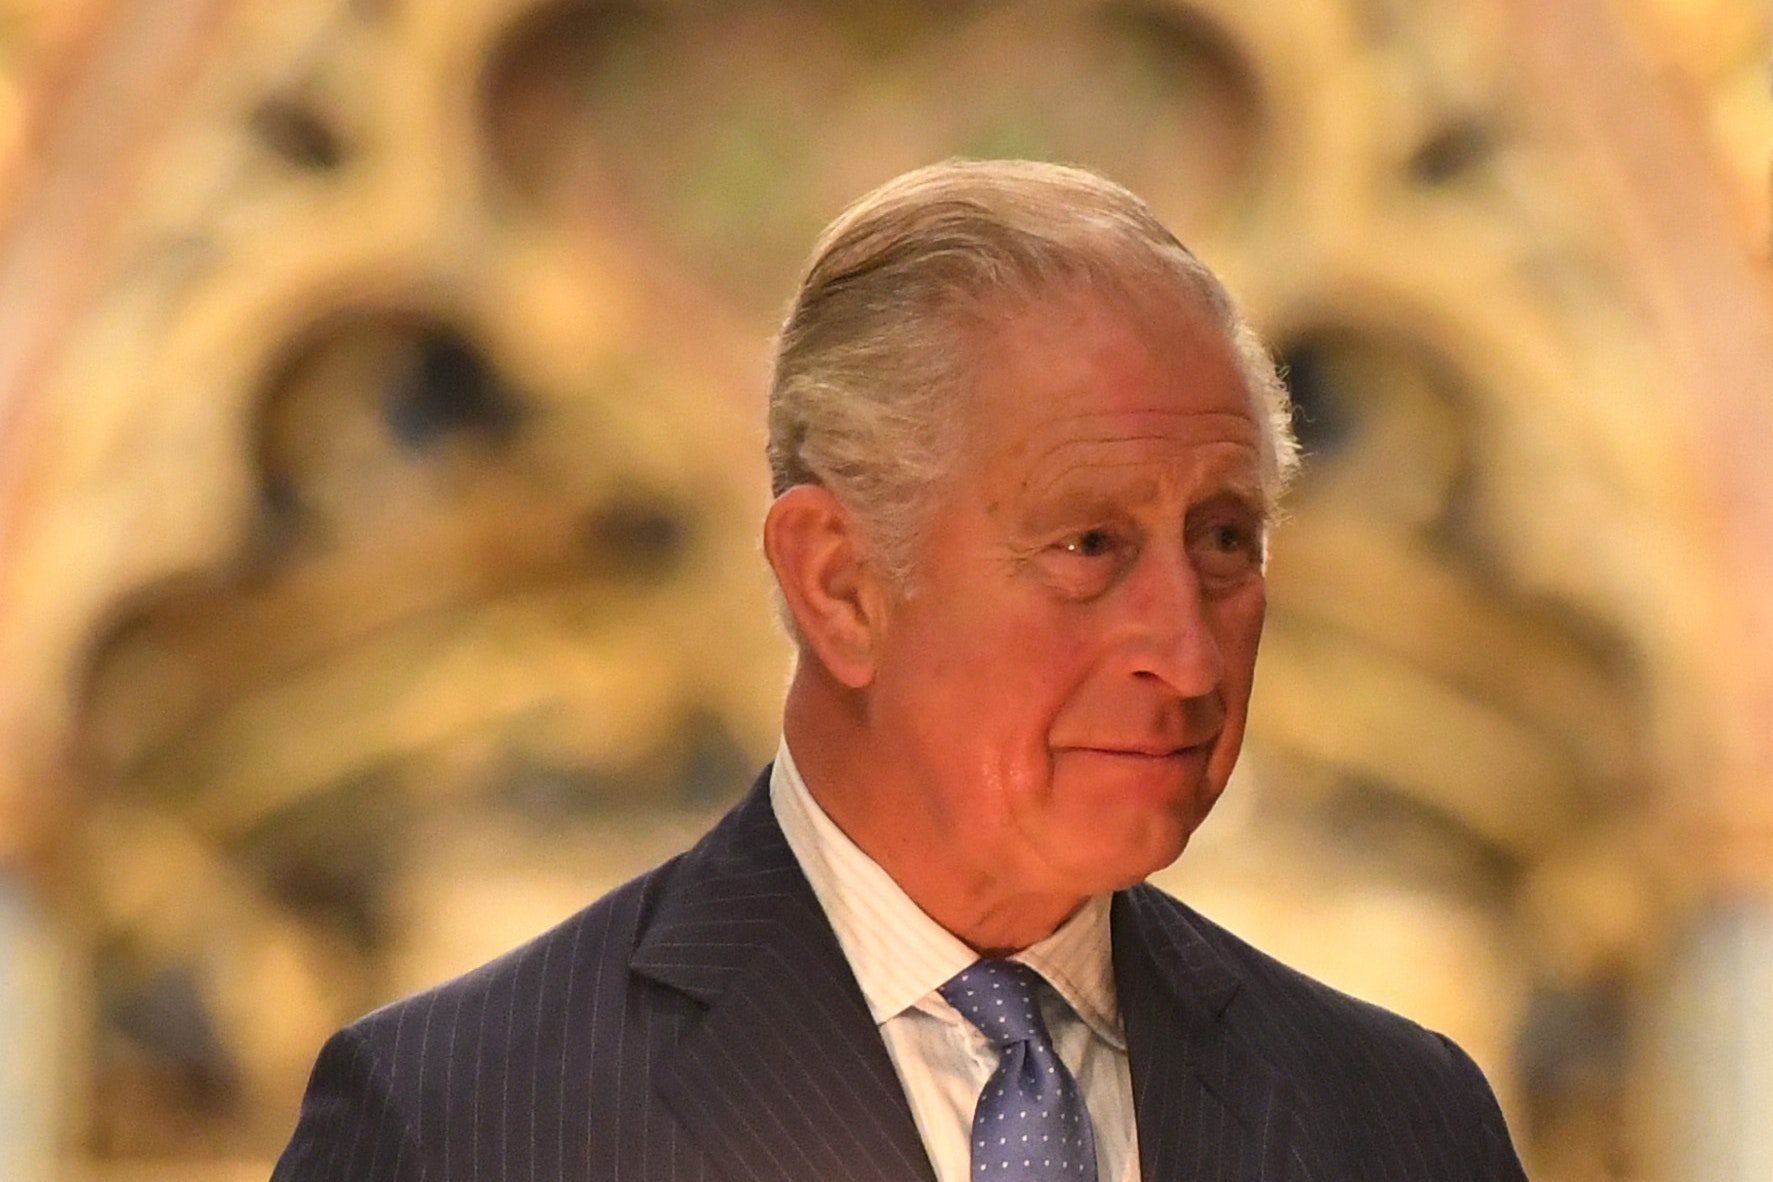 The Prince of Wales signs up for Private Passions